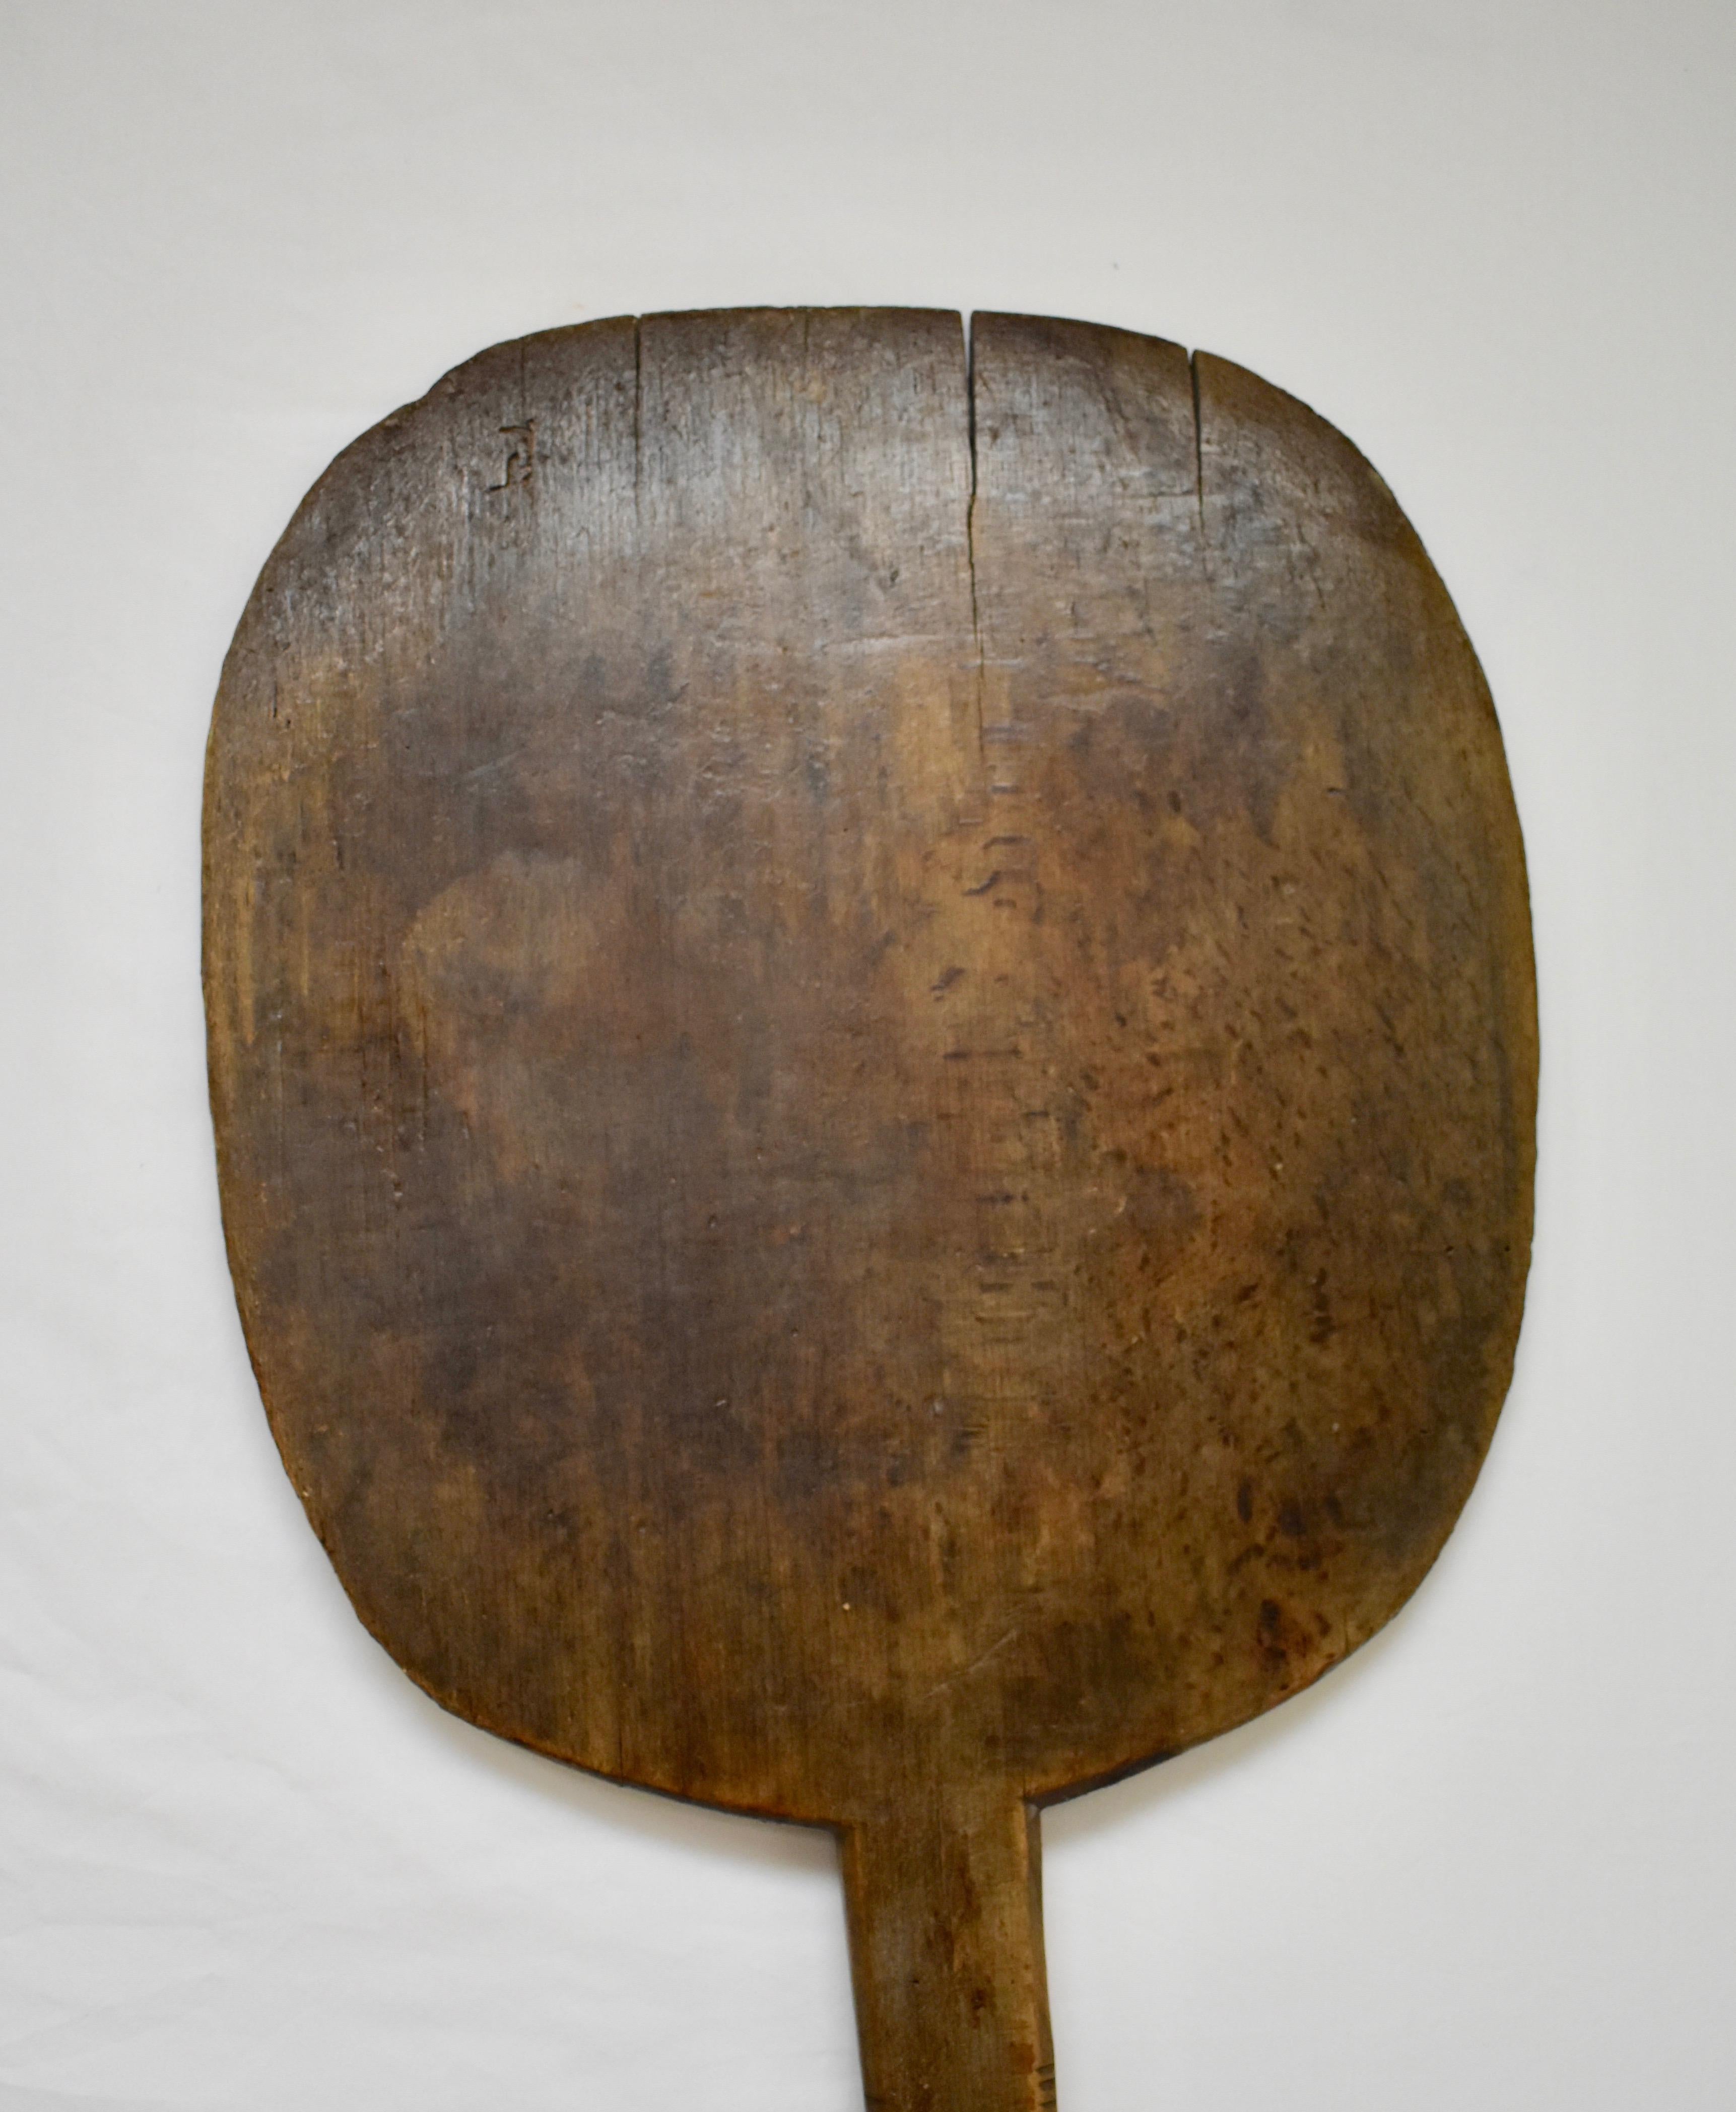 This large vintage oak bread peel has been hand-carved from a single board. The shaft is worn smooth and the paddle shows slight charring and two or three minor cracks to the lip.